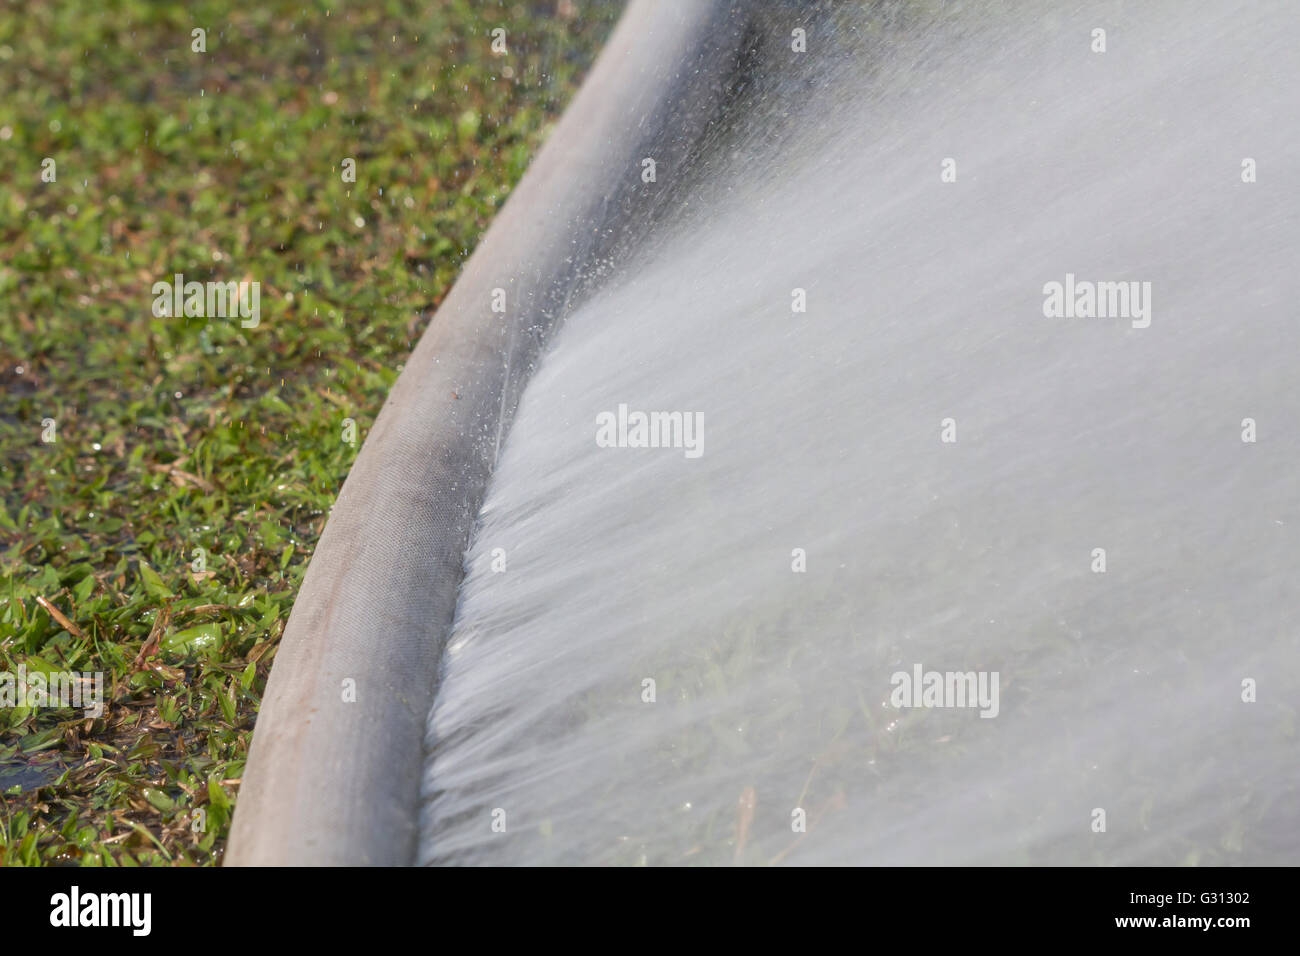 water leaking from hole in a hose Stock Photo